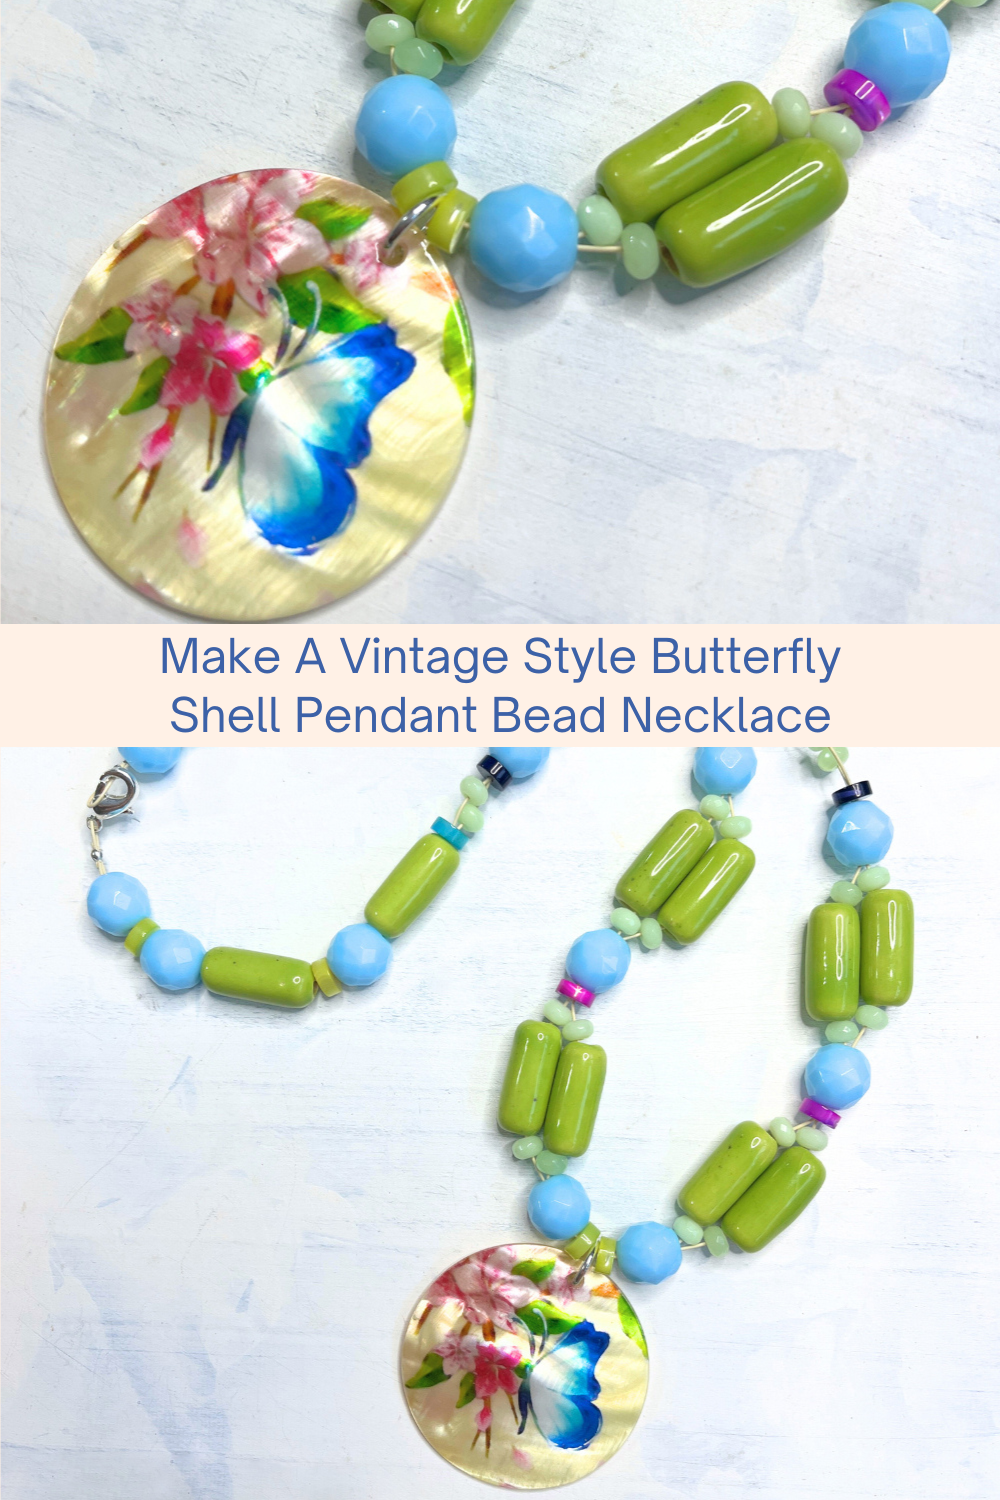 Make A Vintage Style Butterfly Shell Pendant Bead Necklace Collage